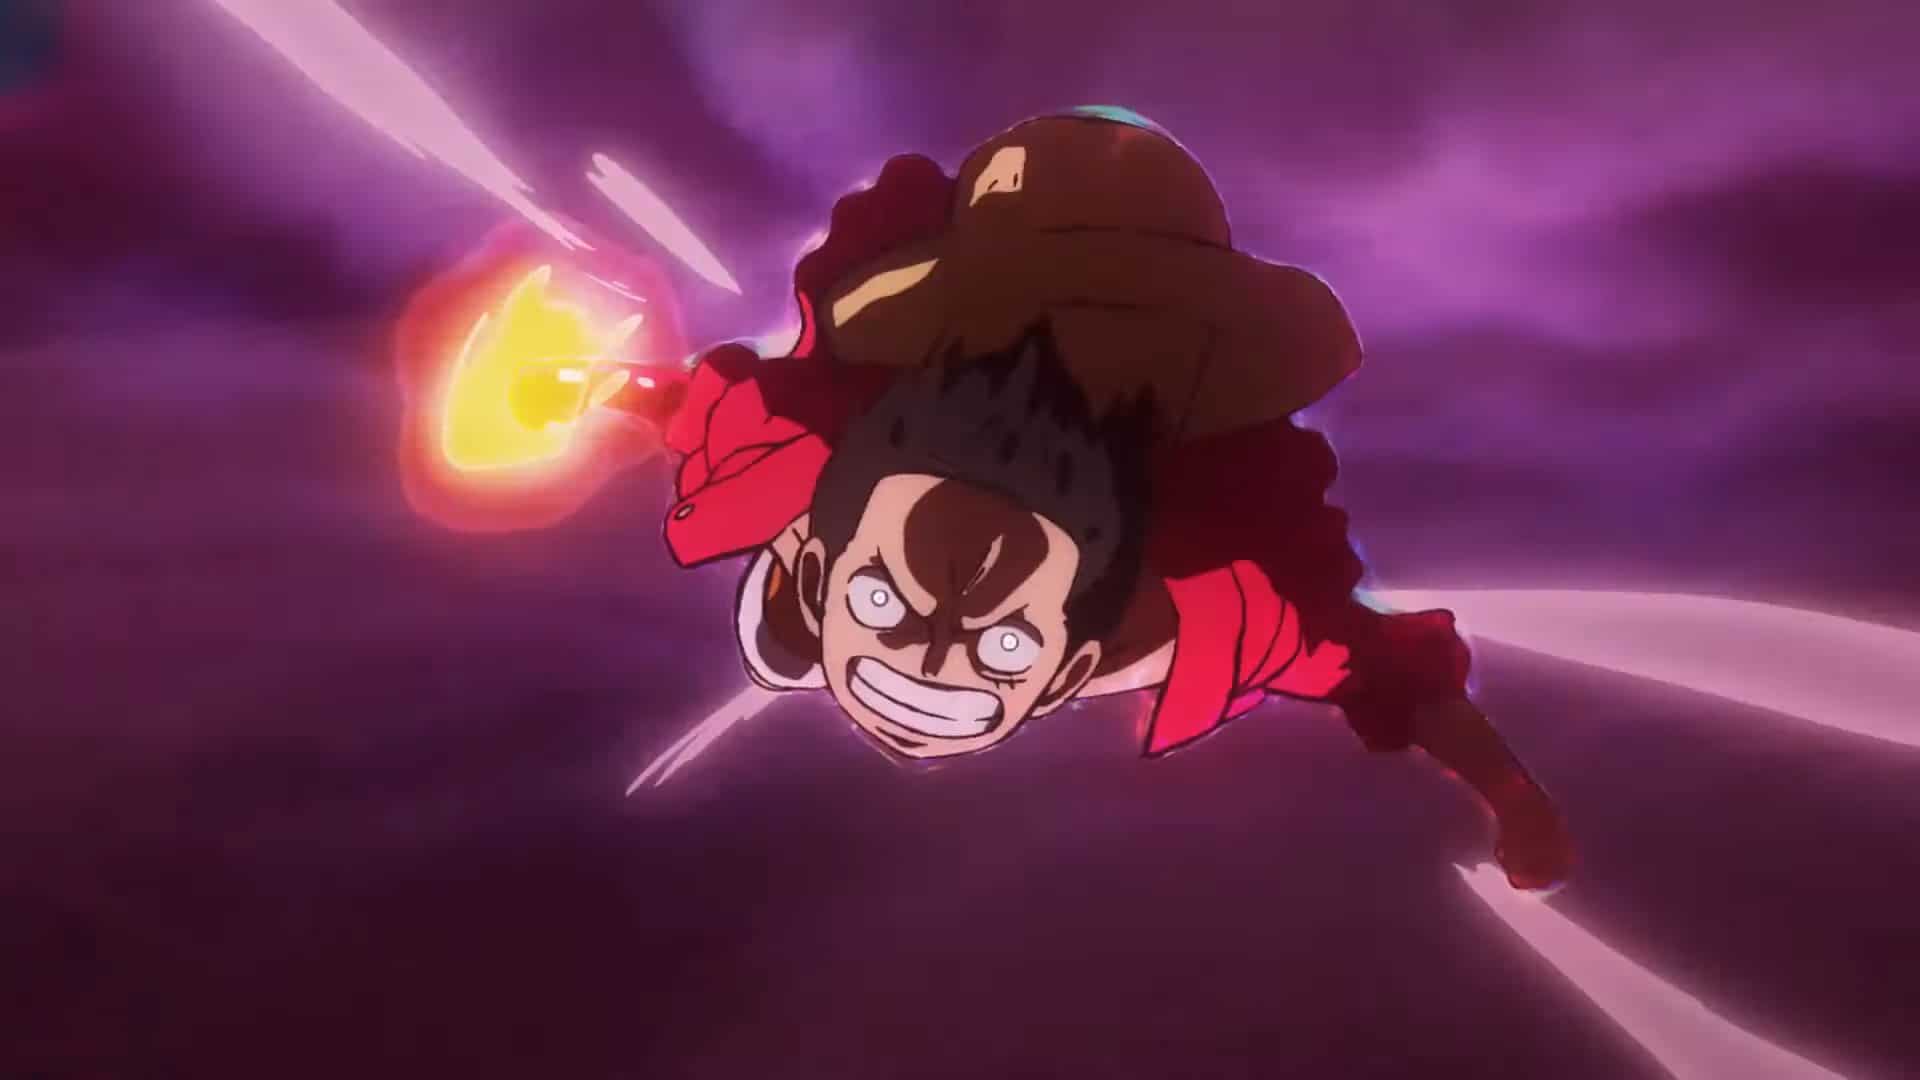 One Piece's Luffy's most powerful state.